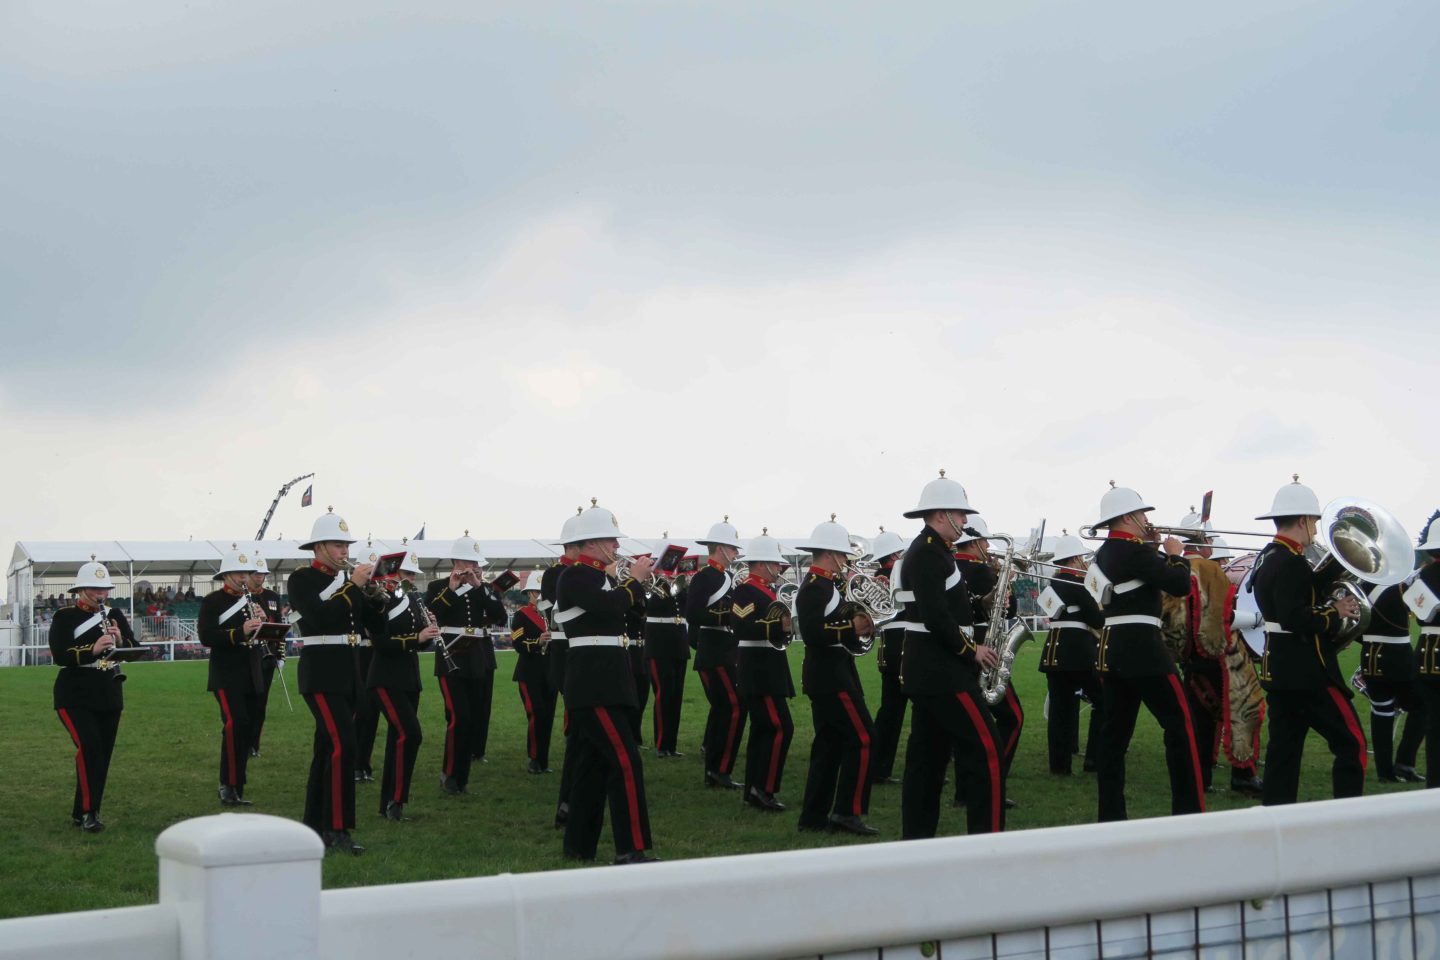 marching band in the cornwall show ground